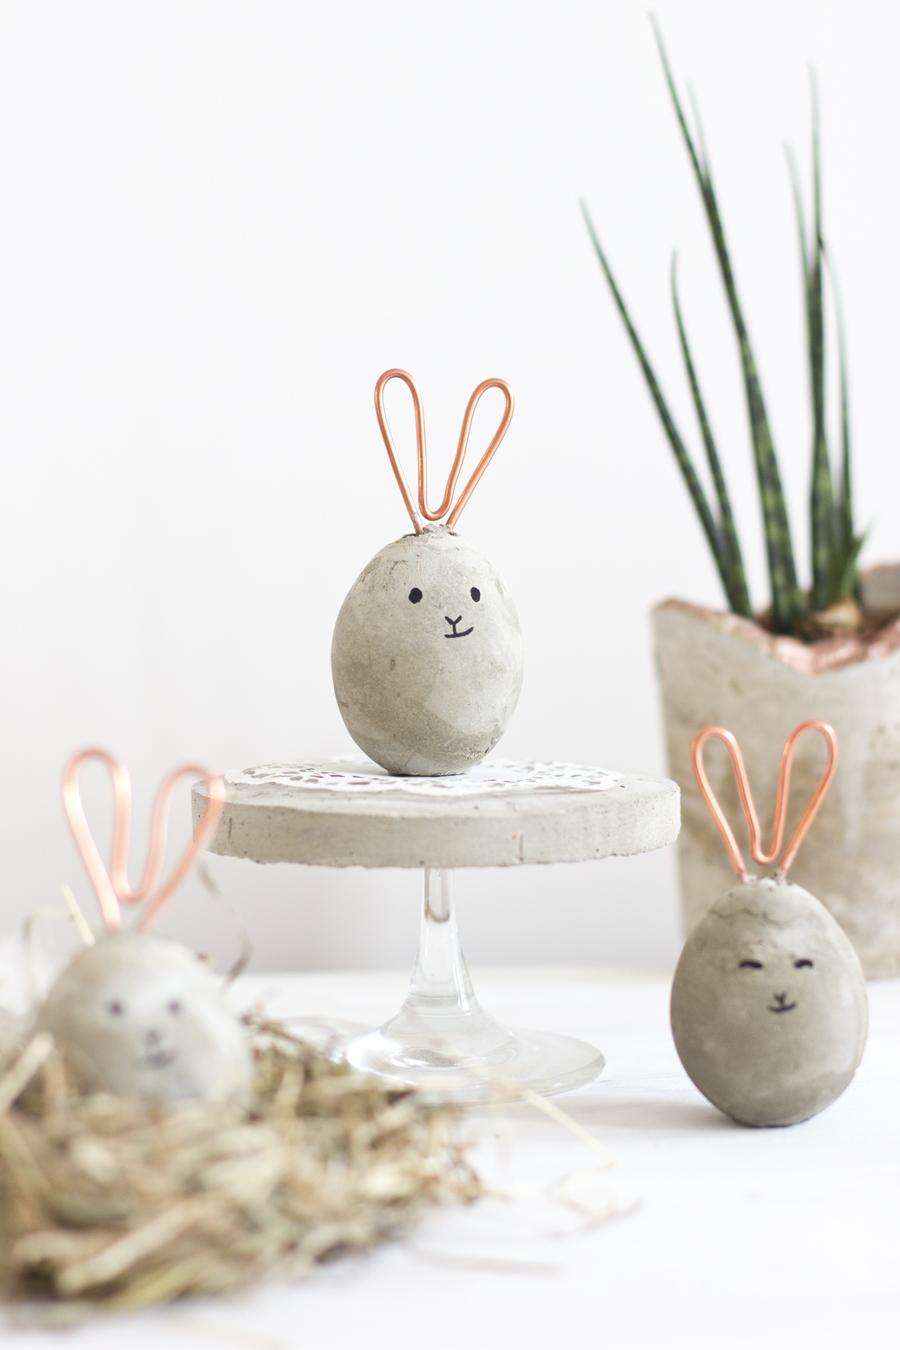 DIY concrete egg shaped Easter bunnies with copper wire ears